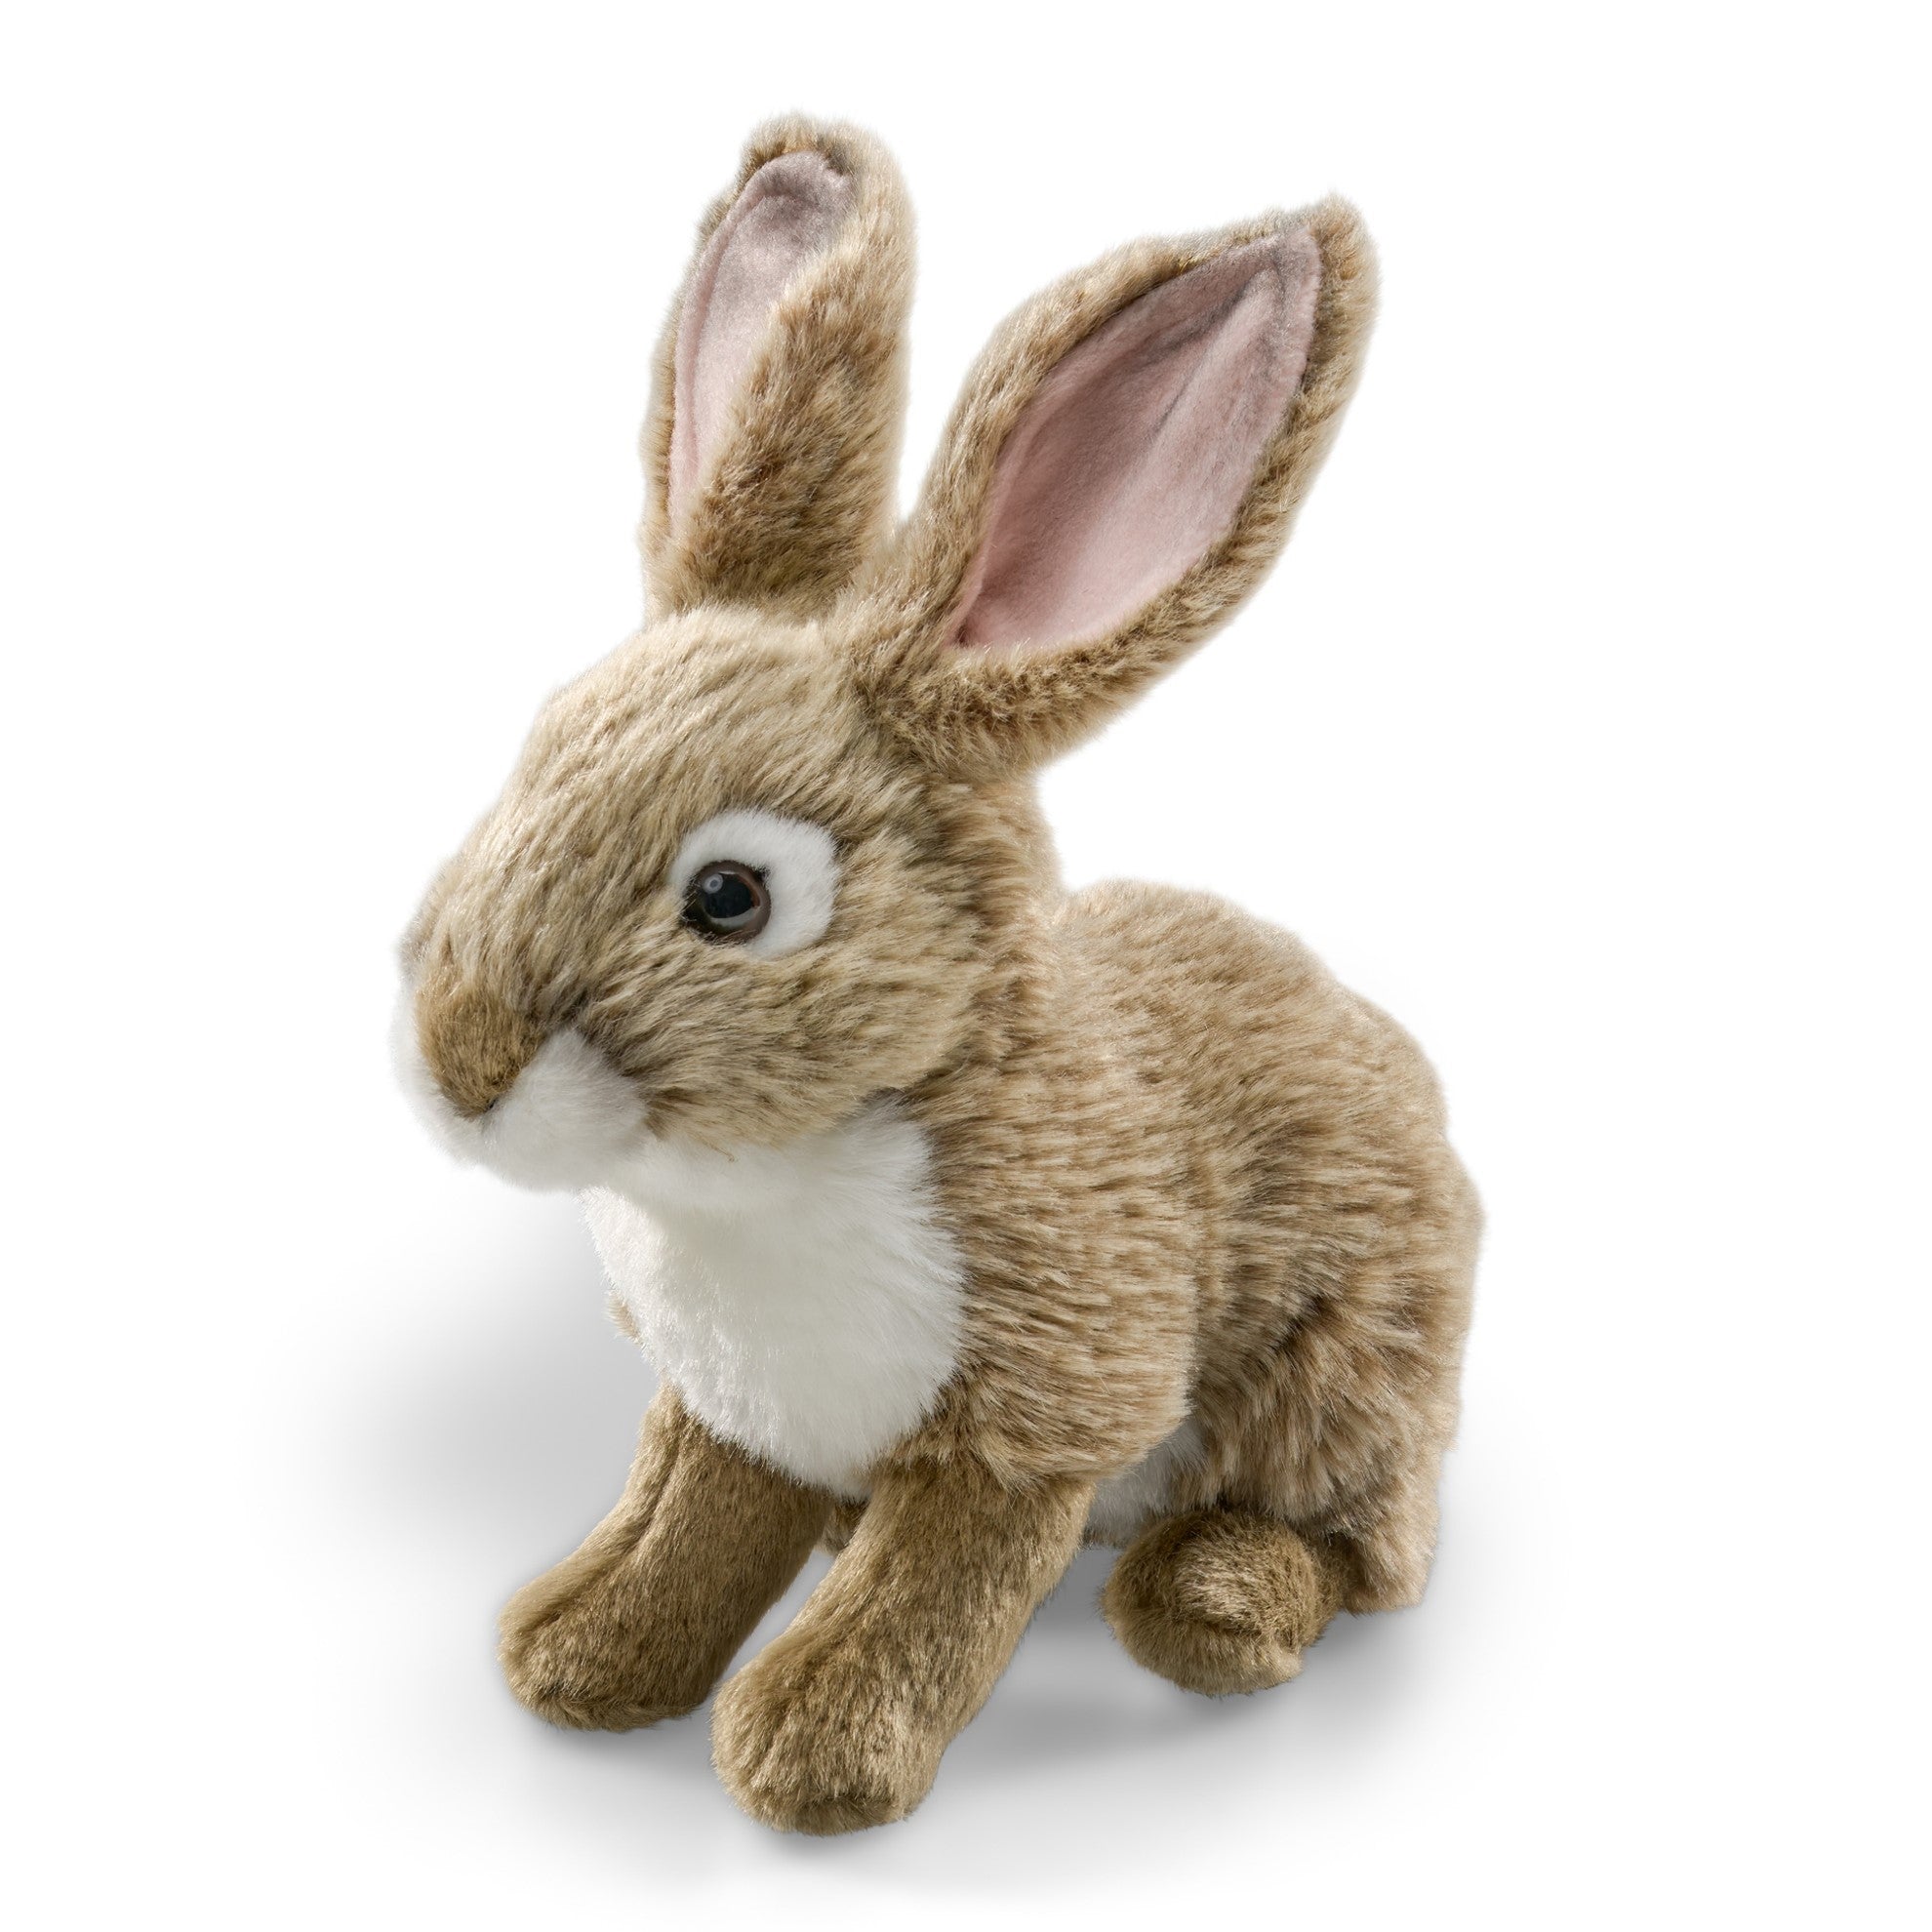 A photo of the eastern cottontail rabbit plush toy